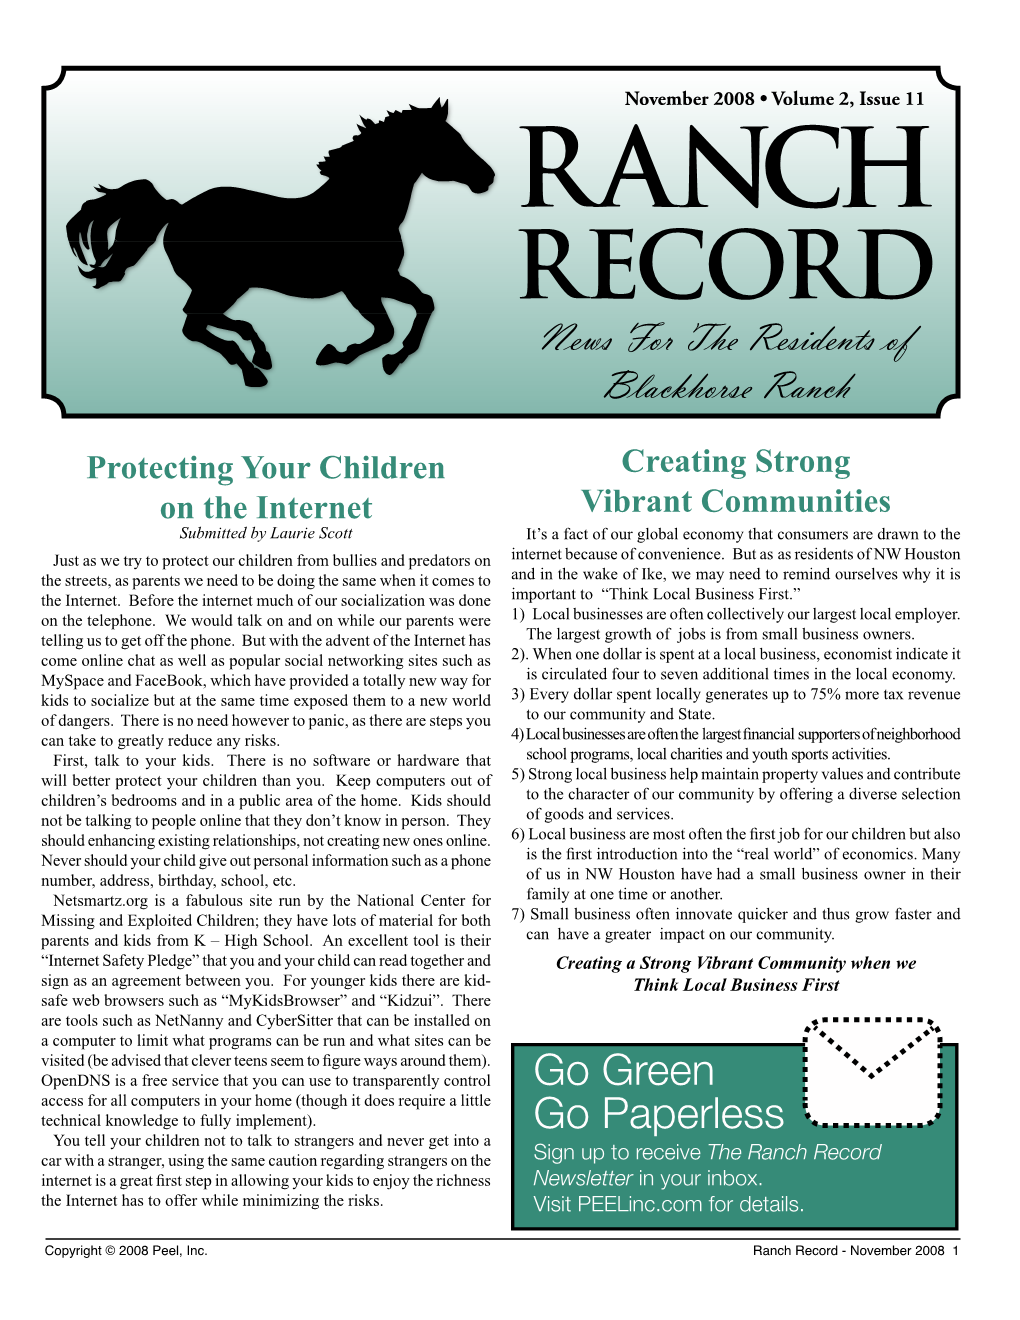 Record 2, Issue 11 Ranch Record News for the Residents of Blackhorse Ranch